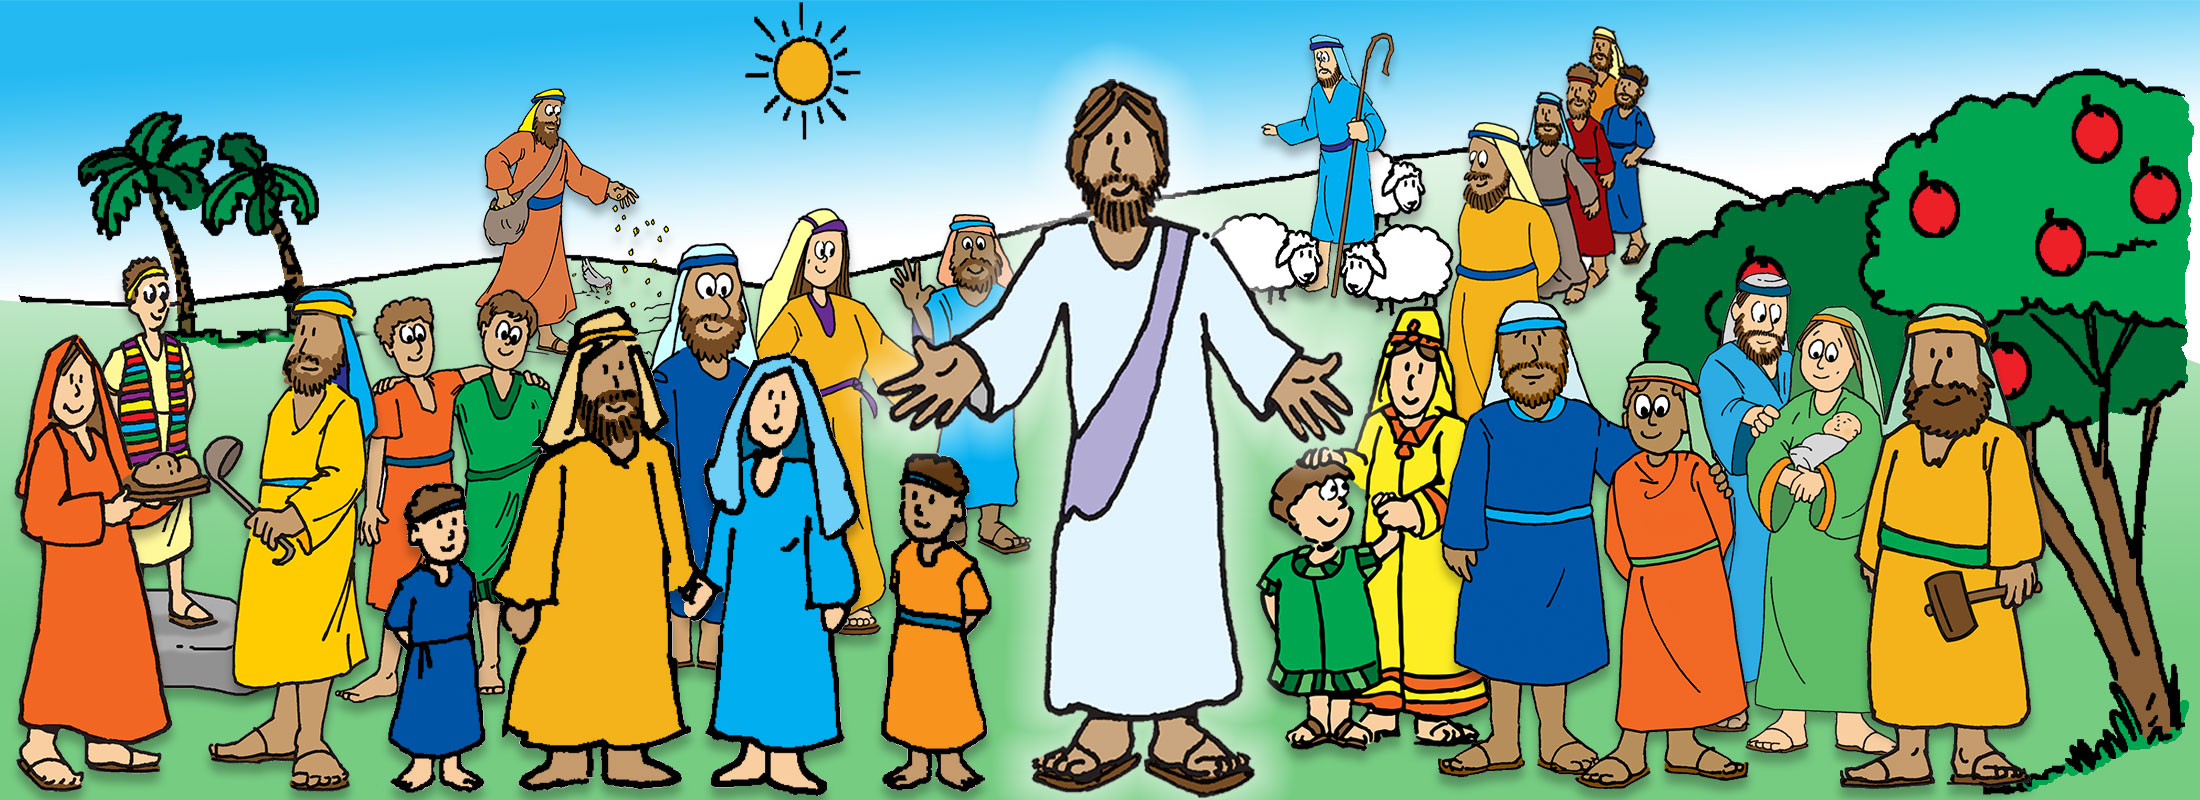 Large image that shows various Bible characters